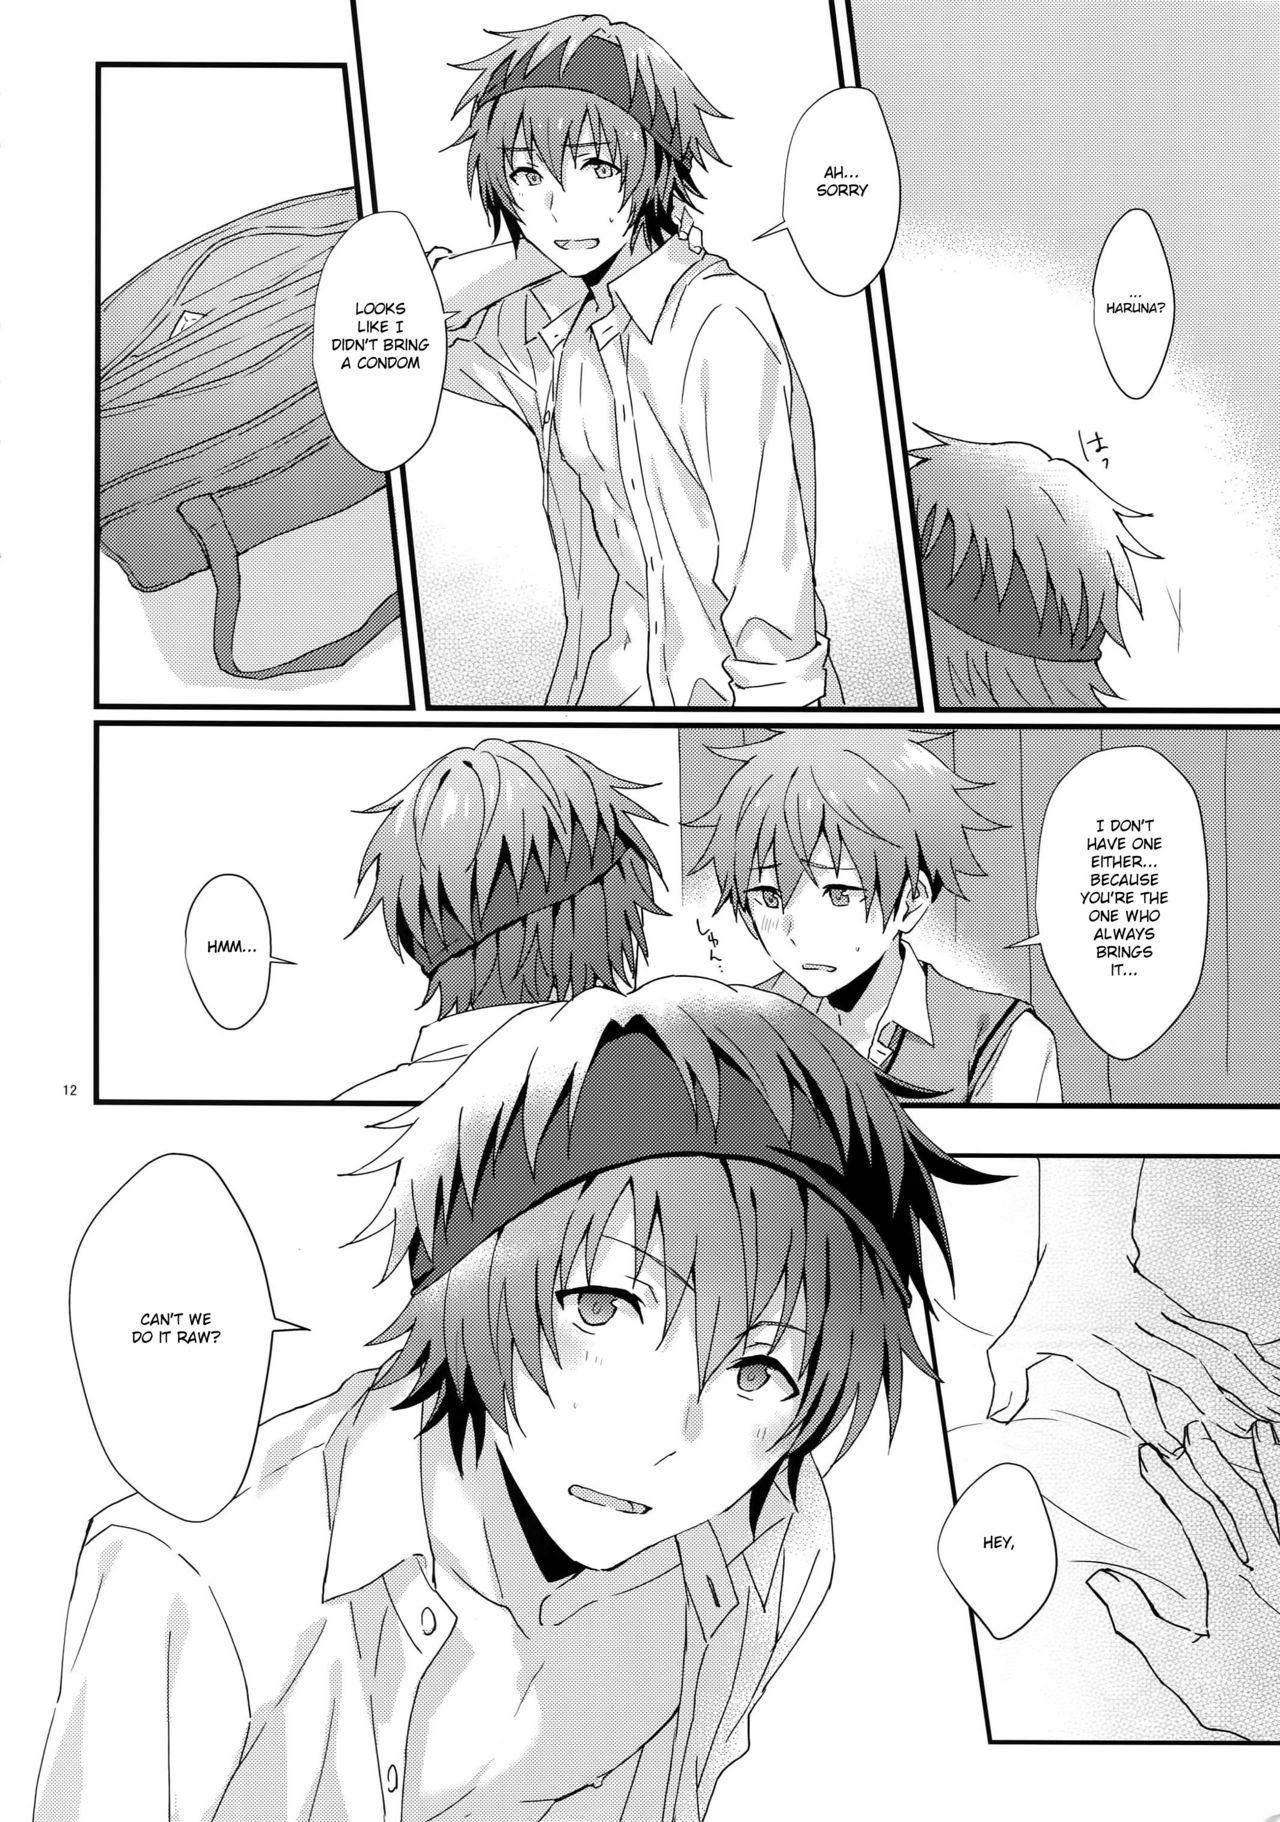 Free Oral Sex Which One's Better? - The idolmaster Rebolando - Page 11